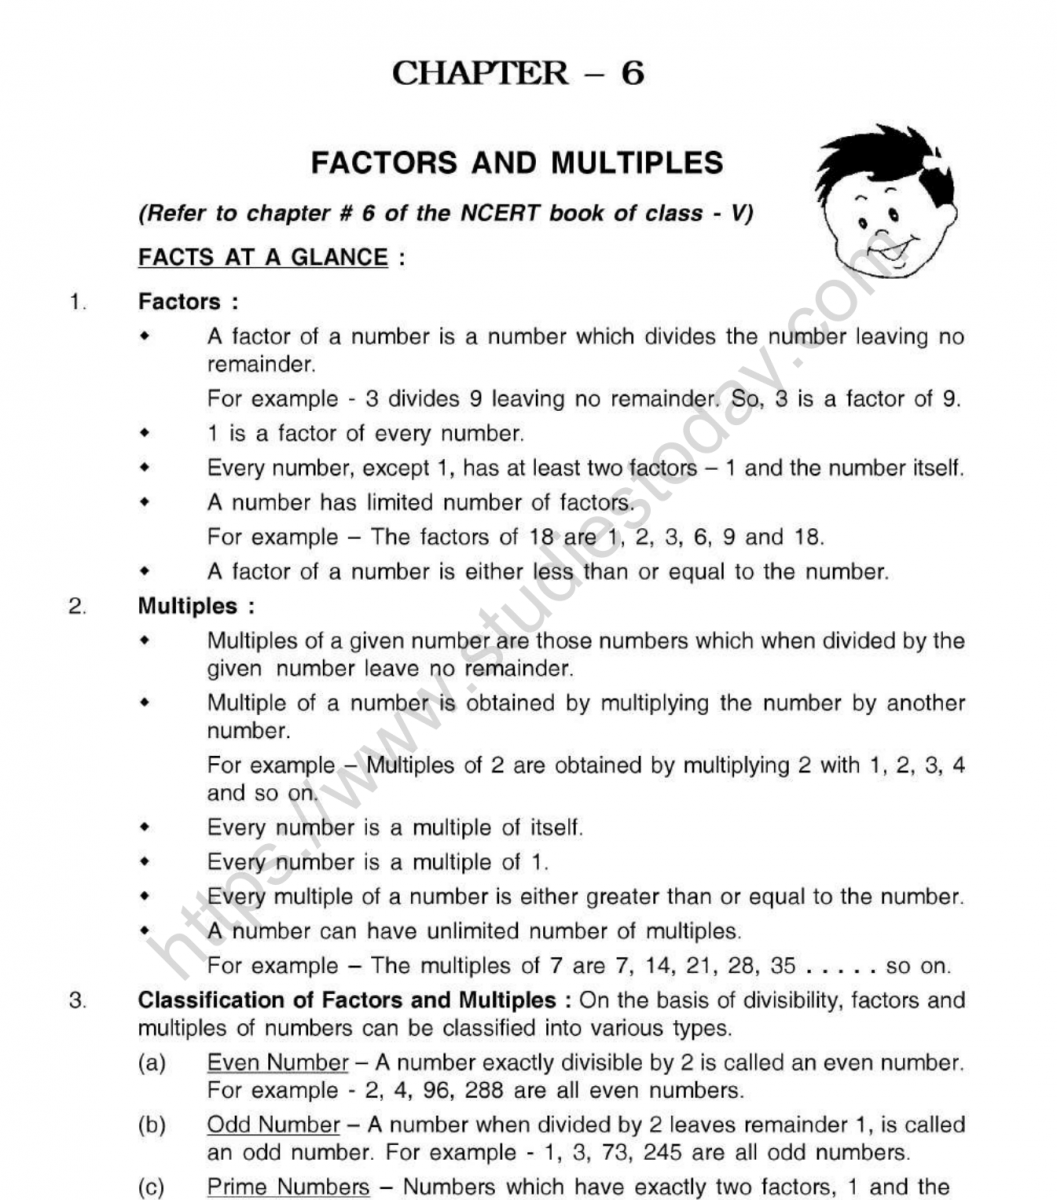 factors-and-multiples-common-multiples-free-math-worksheets